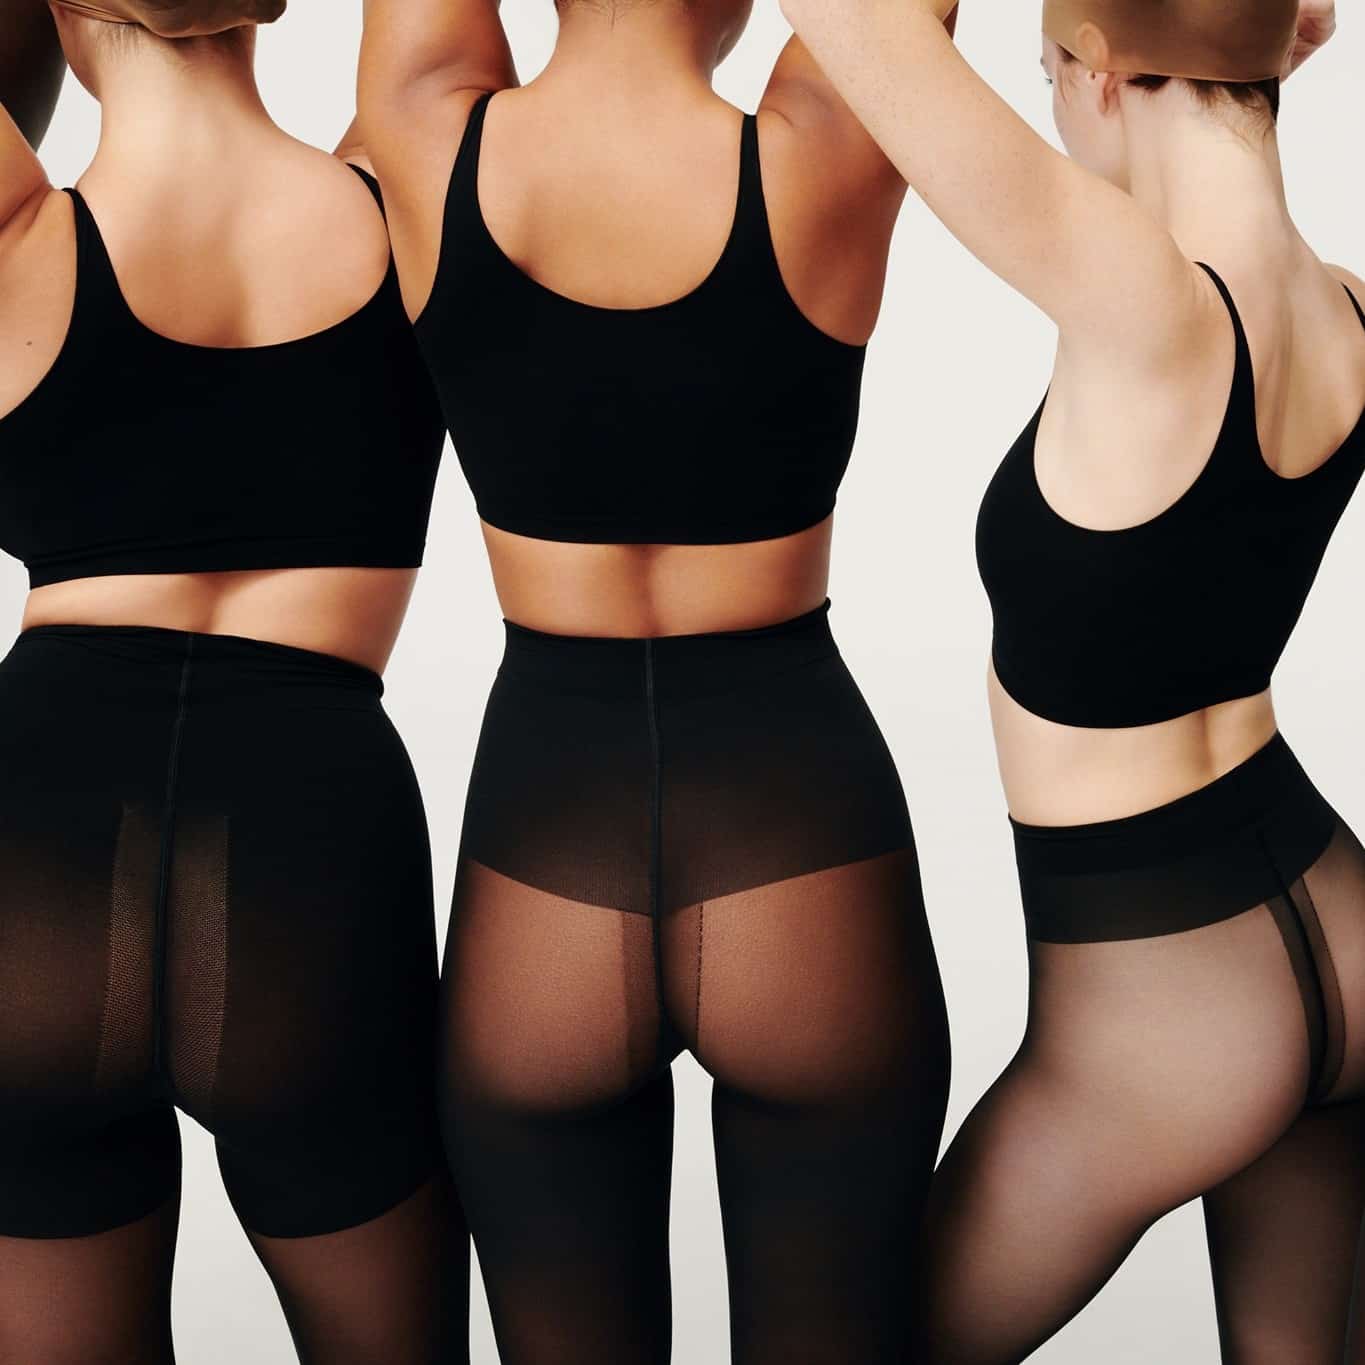 Heist Studios - Tights and shapewear that stand-alone but also